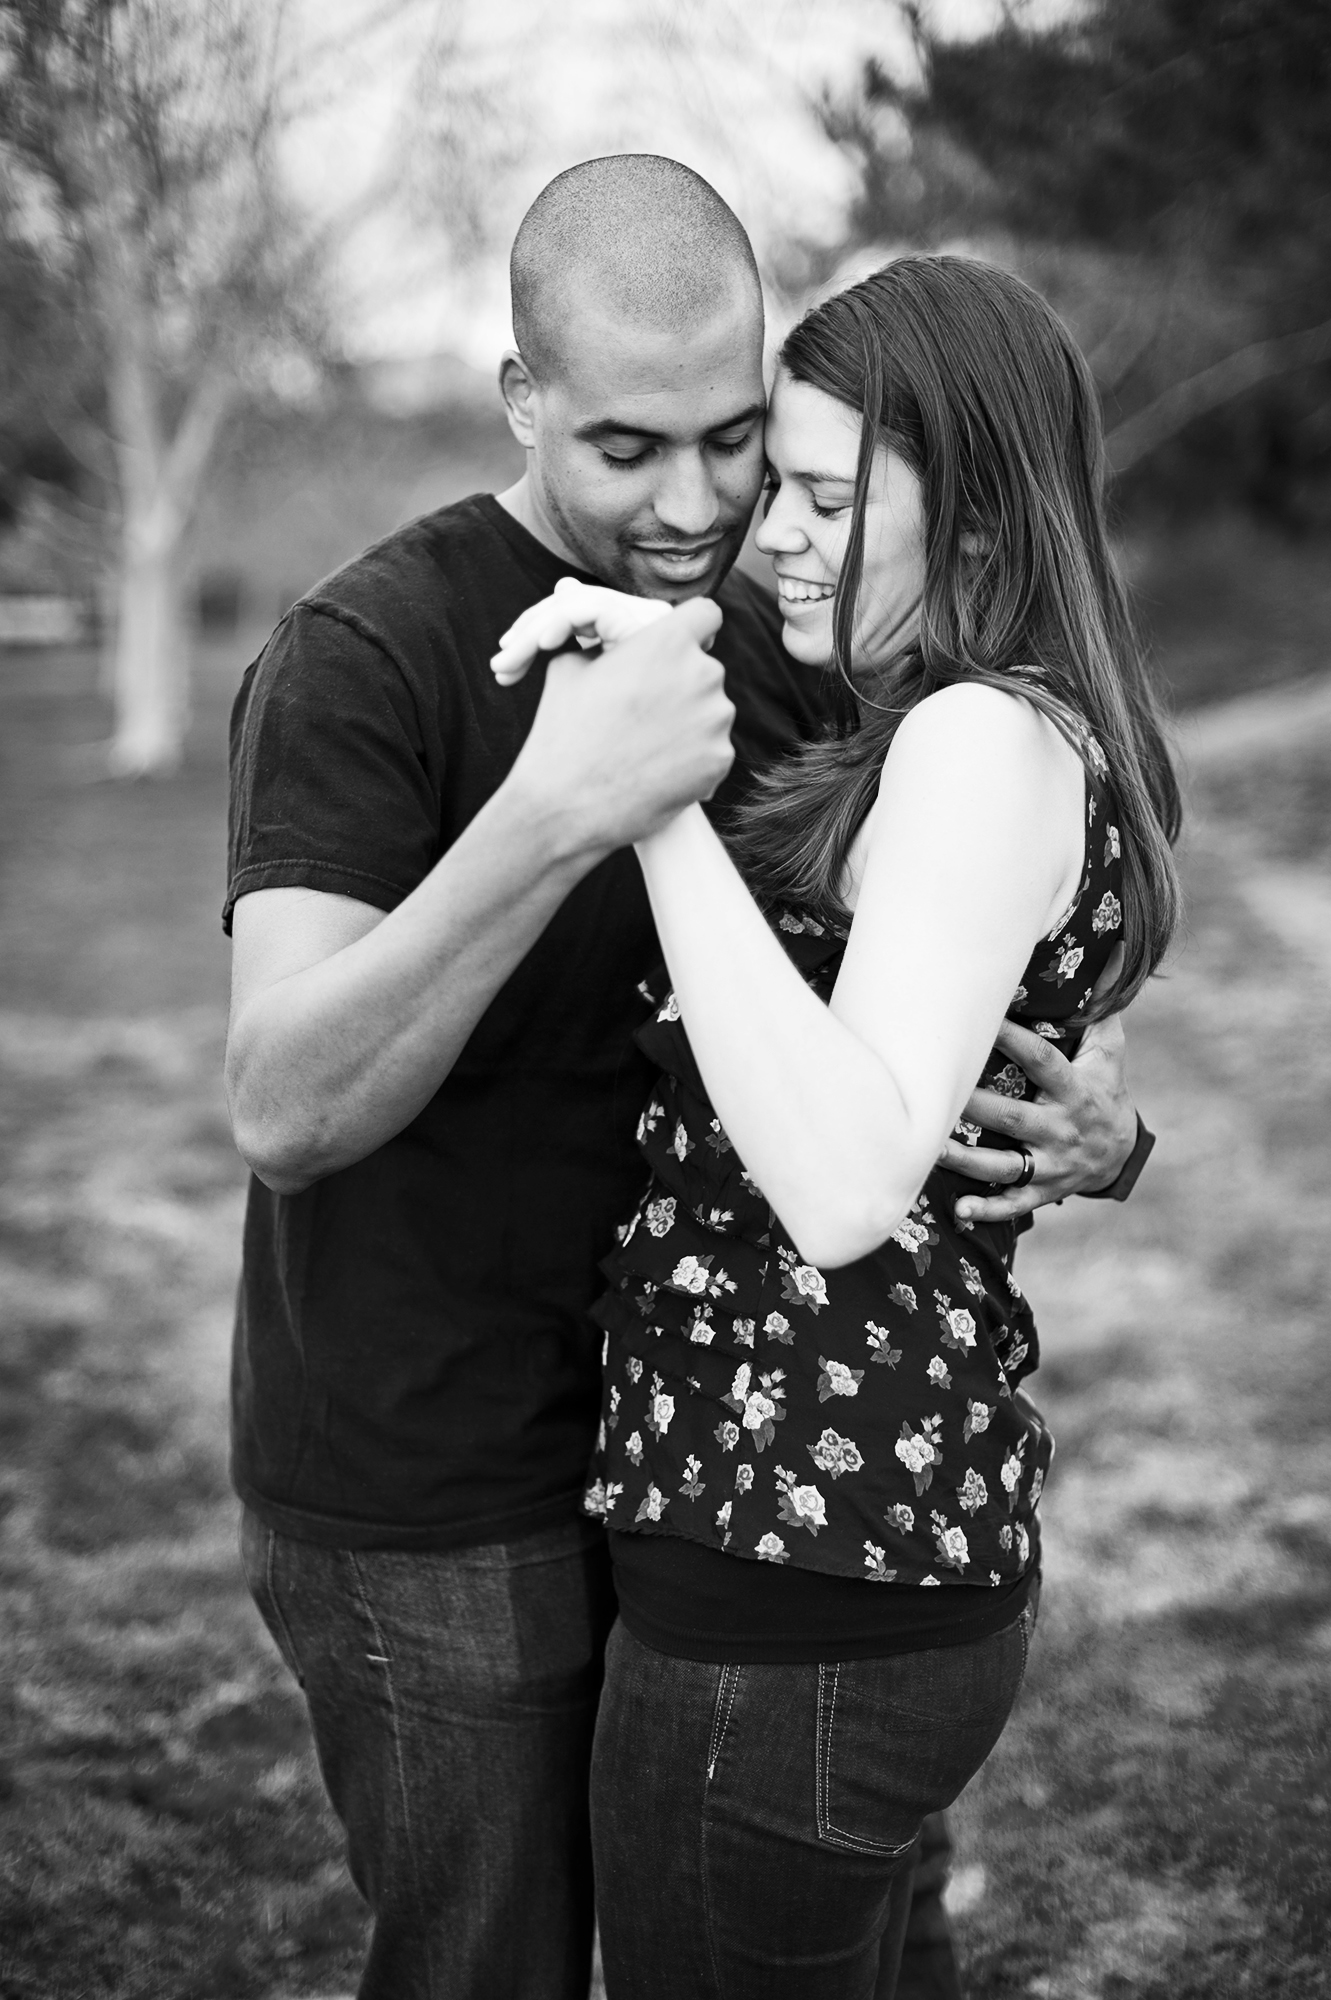 Donald Hawthorne, 29, from Mission Viejo, Calif., is with his wife, Amber Hawthorne, 29, from Mission Viejo, Calif., celebrating the upcoming birth of their first child in their own backyard of Mission Viejo, Calif., on Sunday, March 3, 2013.  Mrs. Hawthorne is currently fifteen weeks pregnant. Mr. Hawthorne said, {quote}Being able to raise a child in a godly household is why I am most excited about having a baby with my wife.{quote} 